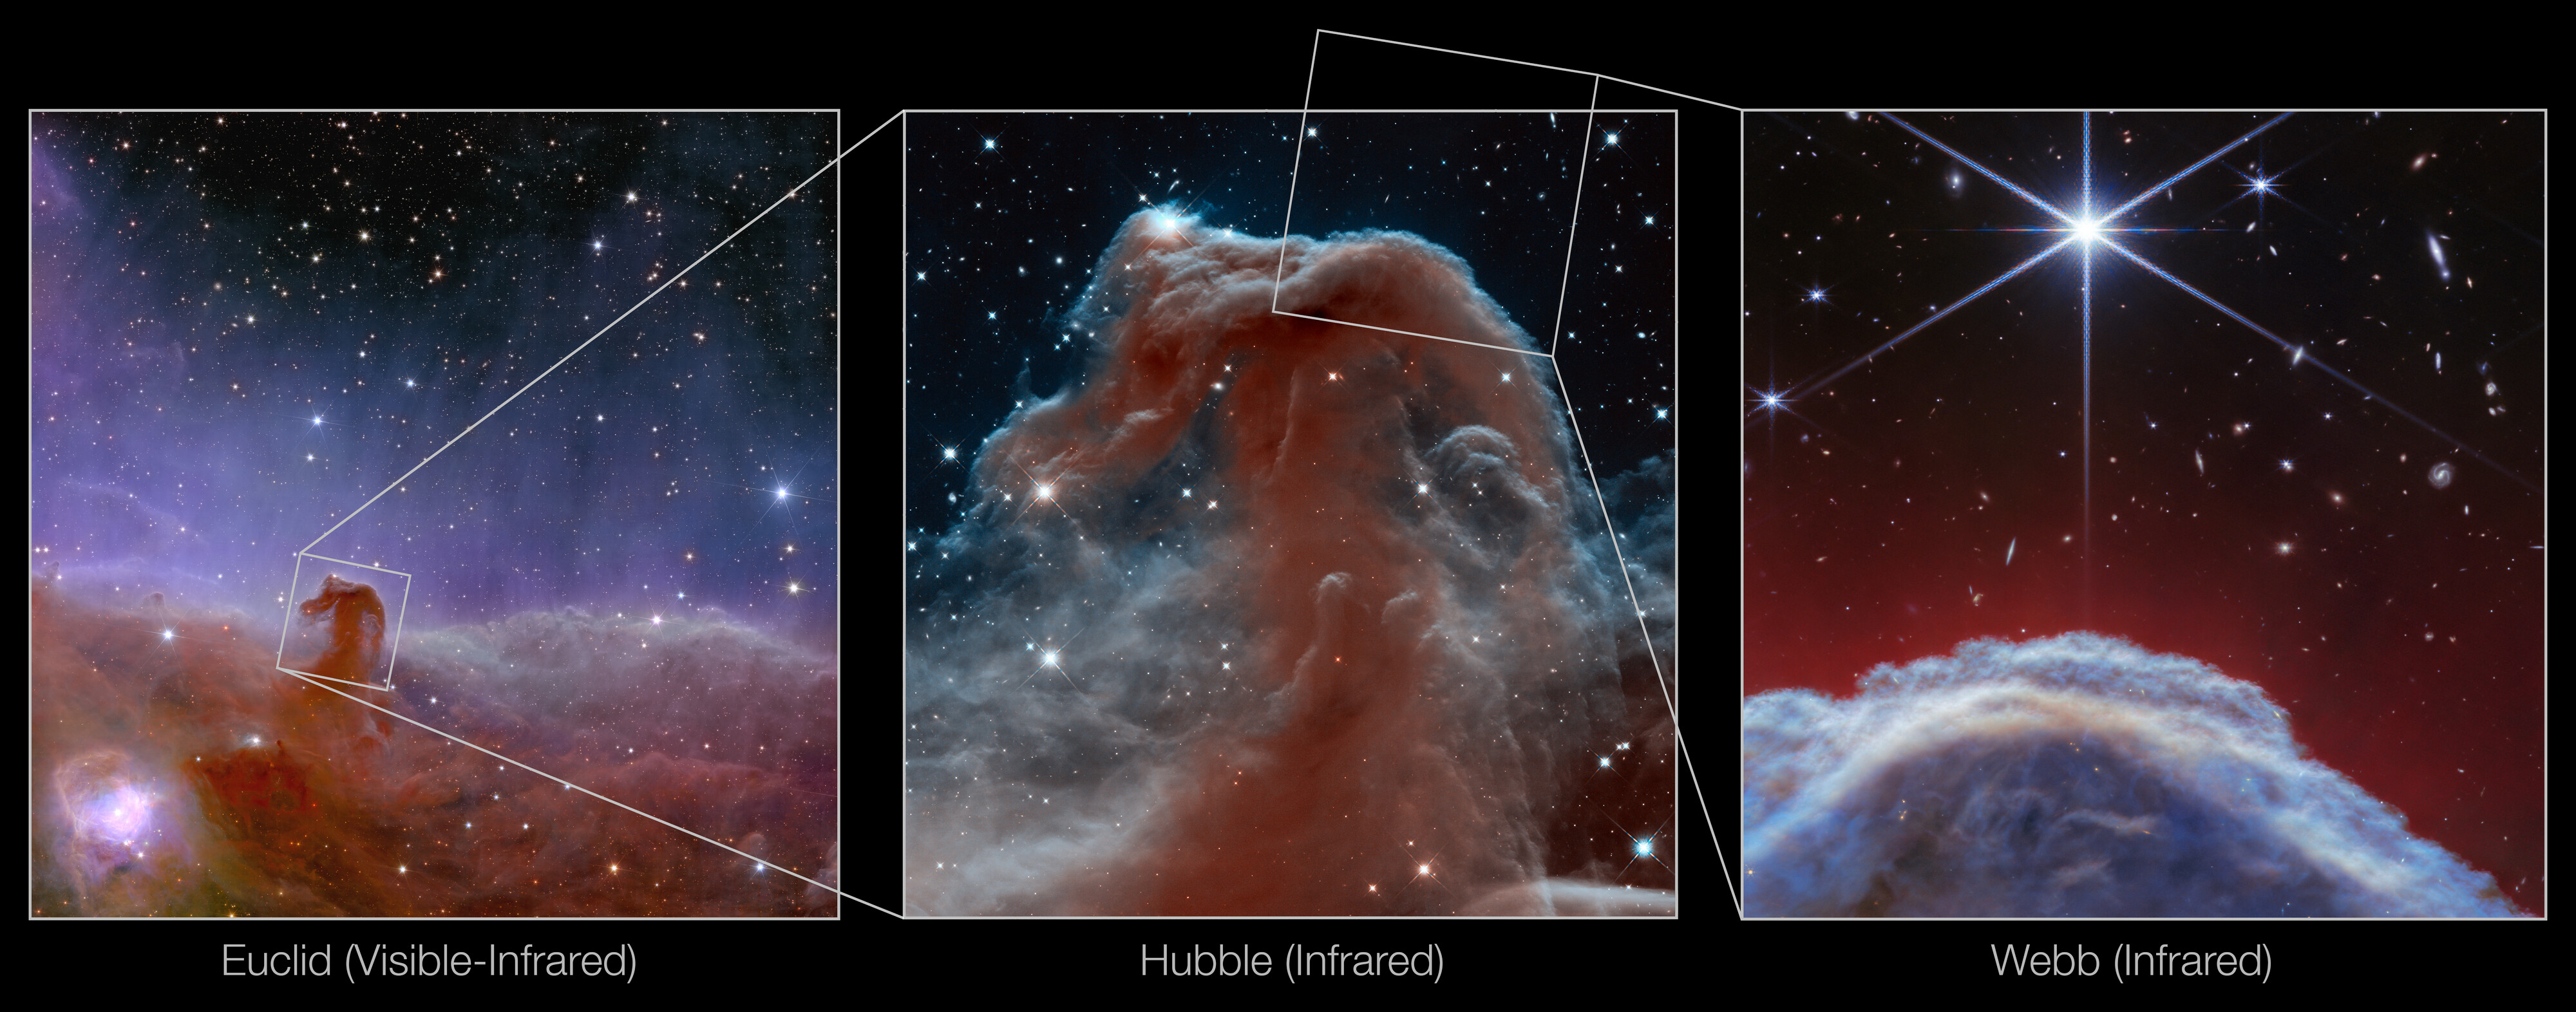 Three views of the Horsehead Nebula (right) ULED sees the nebula in 2023 (center) Hubble infrared view of Barnard 33 in 2013 (right) Part of the Horsehead Nebula seen by the James Webb Space Telescope